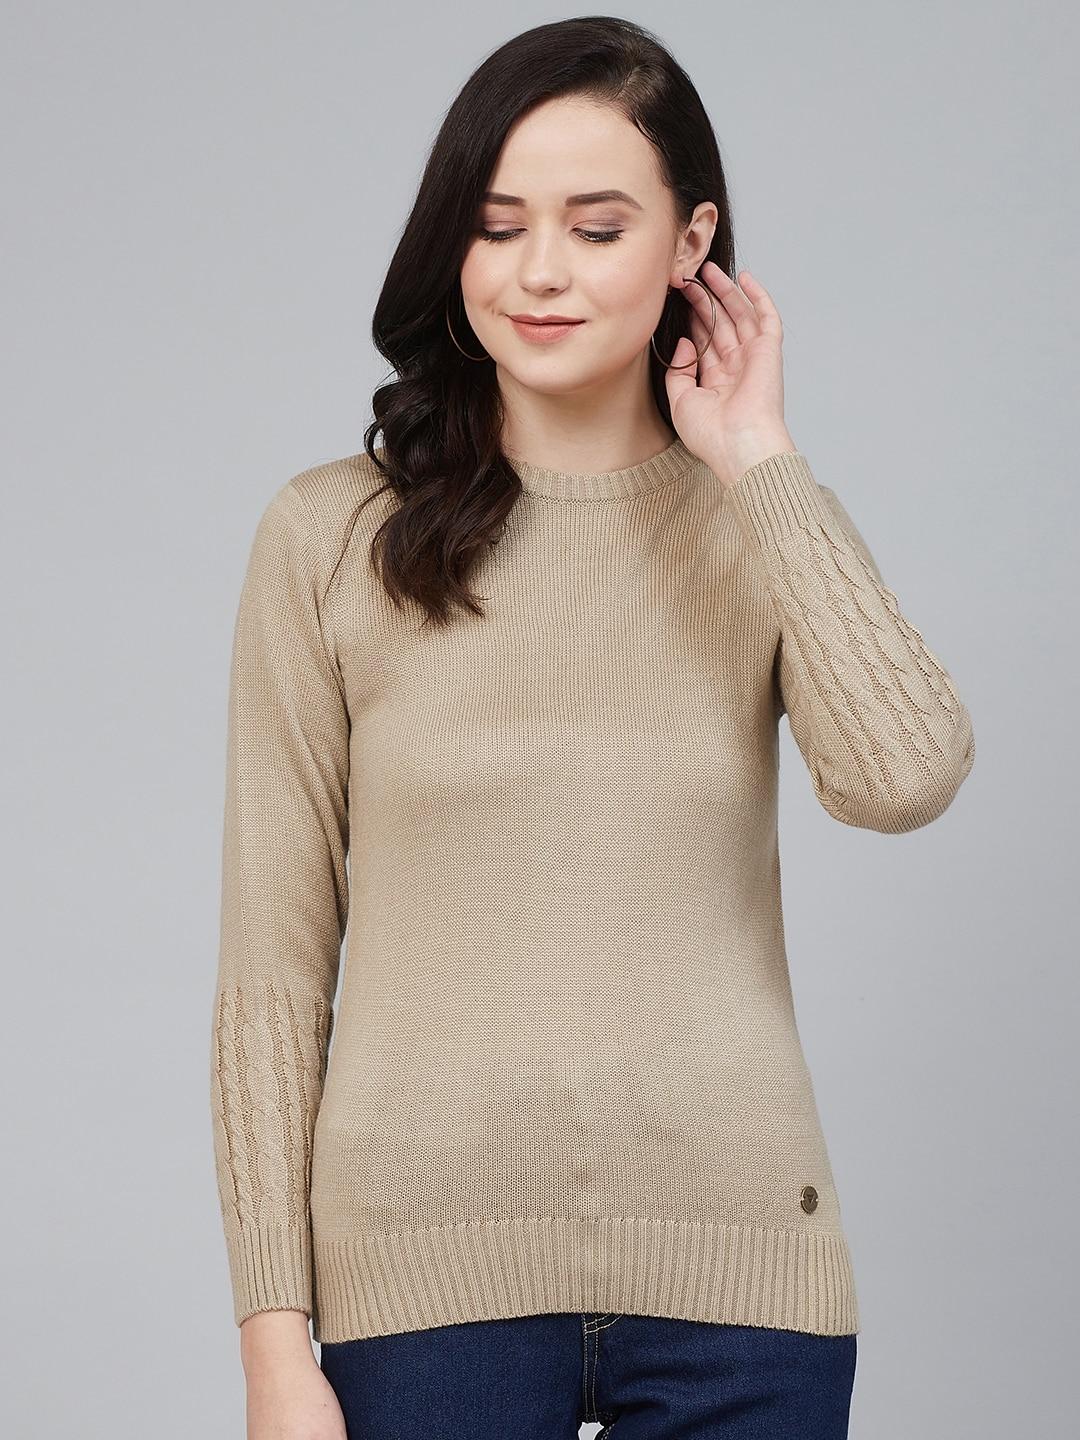 cayman-women-beige-solid-pullover-acrylic-sweater